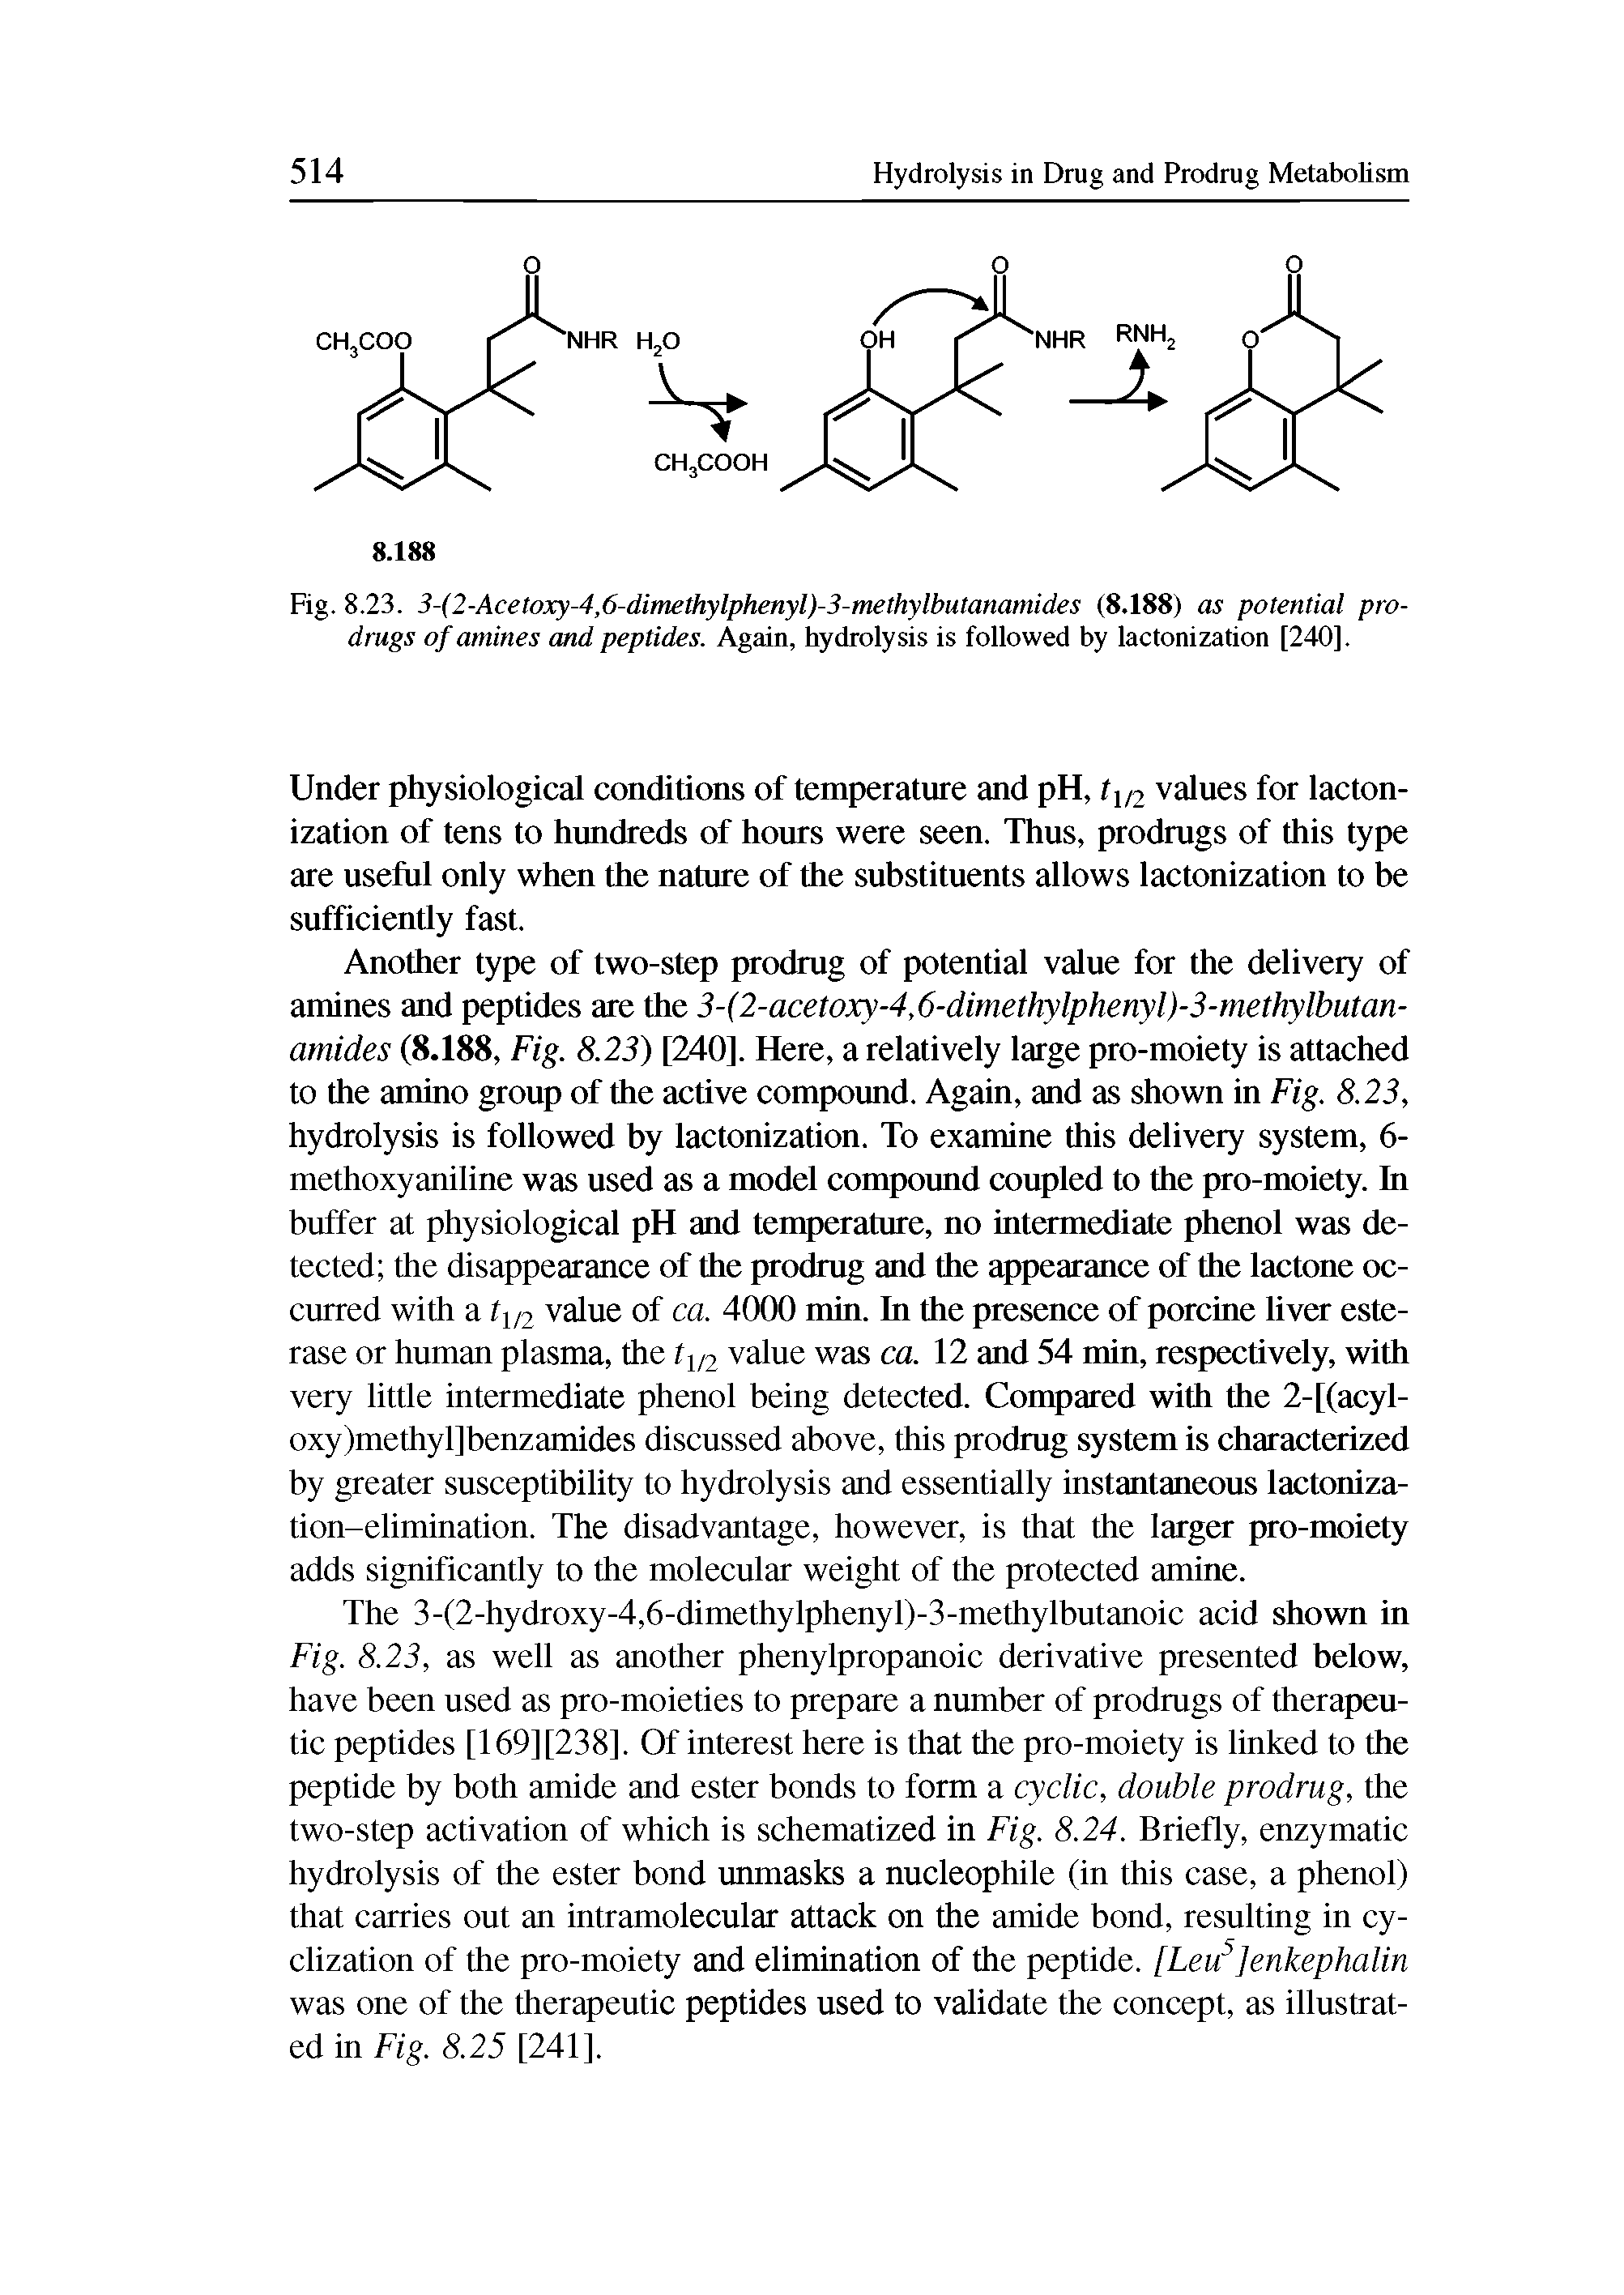 Fig. 8.23. 3-(2-Acetoxy-4,6-dimethylphenyl)-3-methylbutanamides (8.188) as potential prodrugs of amines and peptides. Again, hydrolysis is followed by lactonization [240].